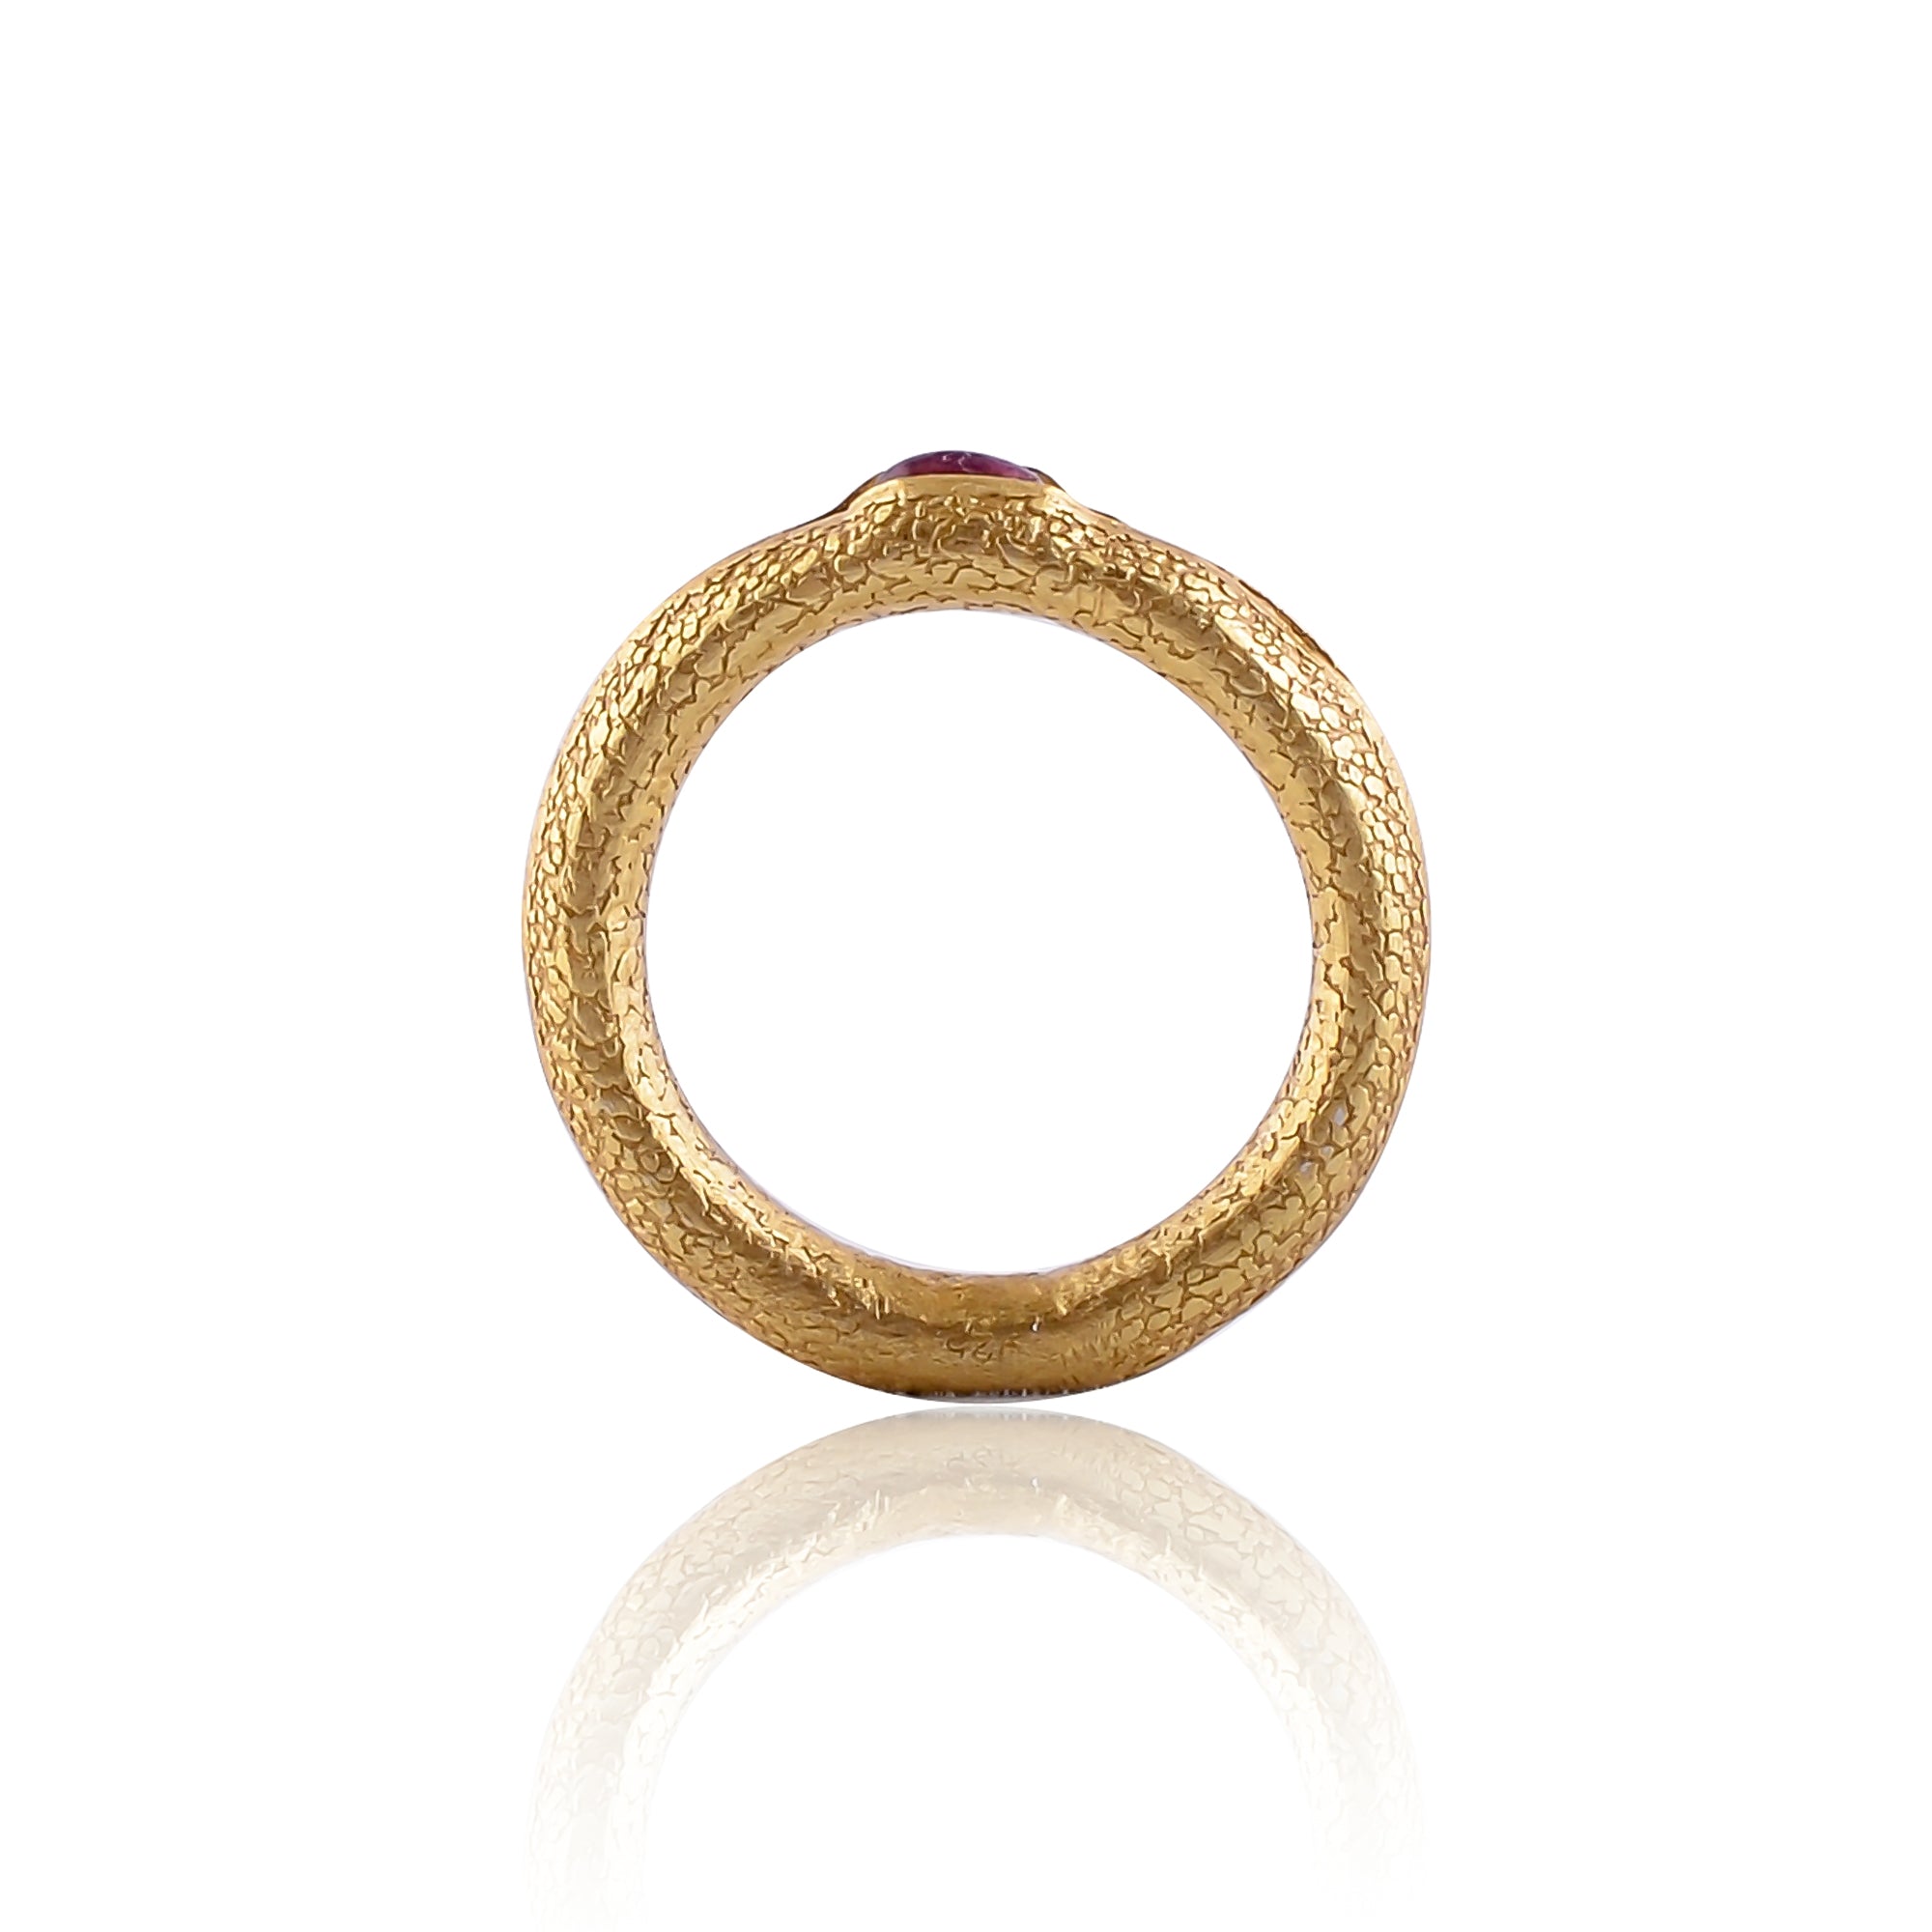 Buy Indian Handcrafted Silver Gold Plated Pink Tourmaline Ring